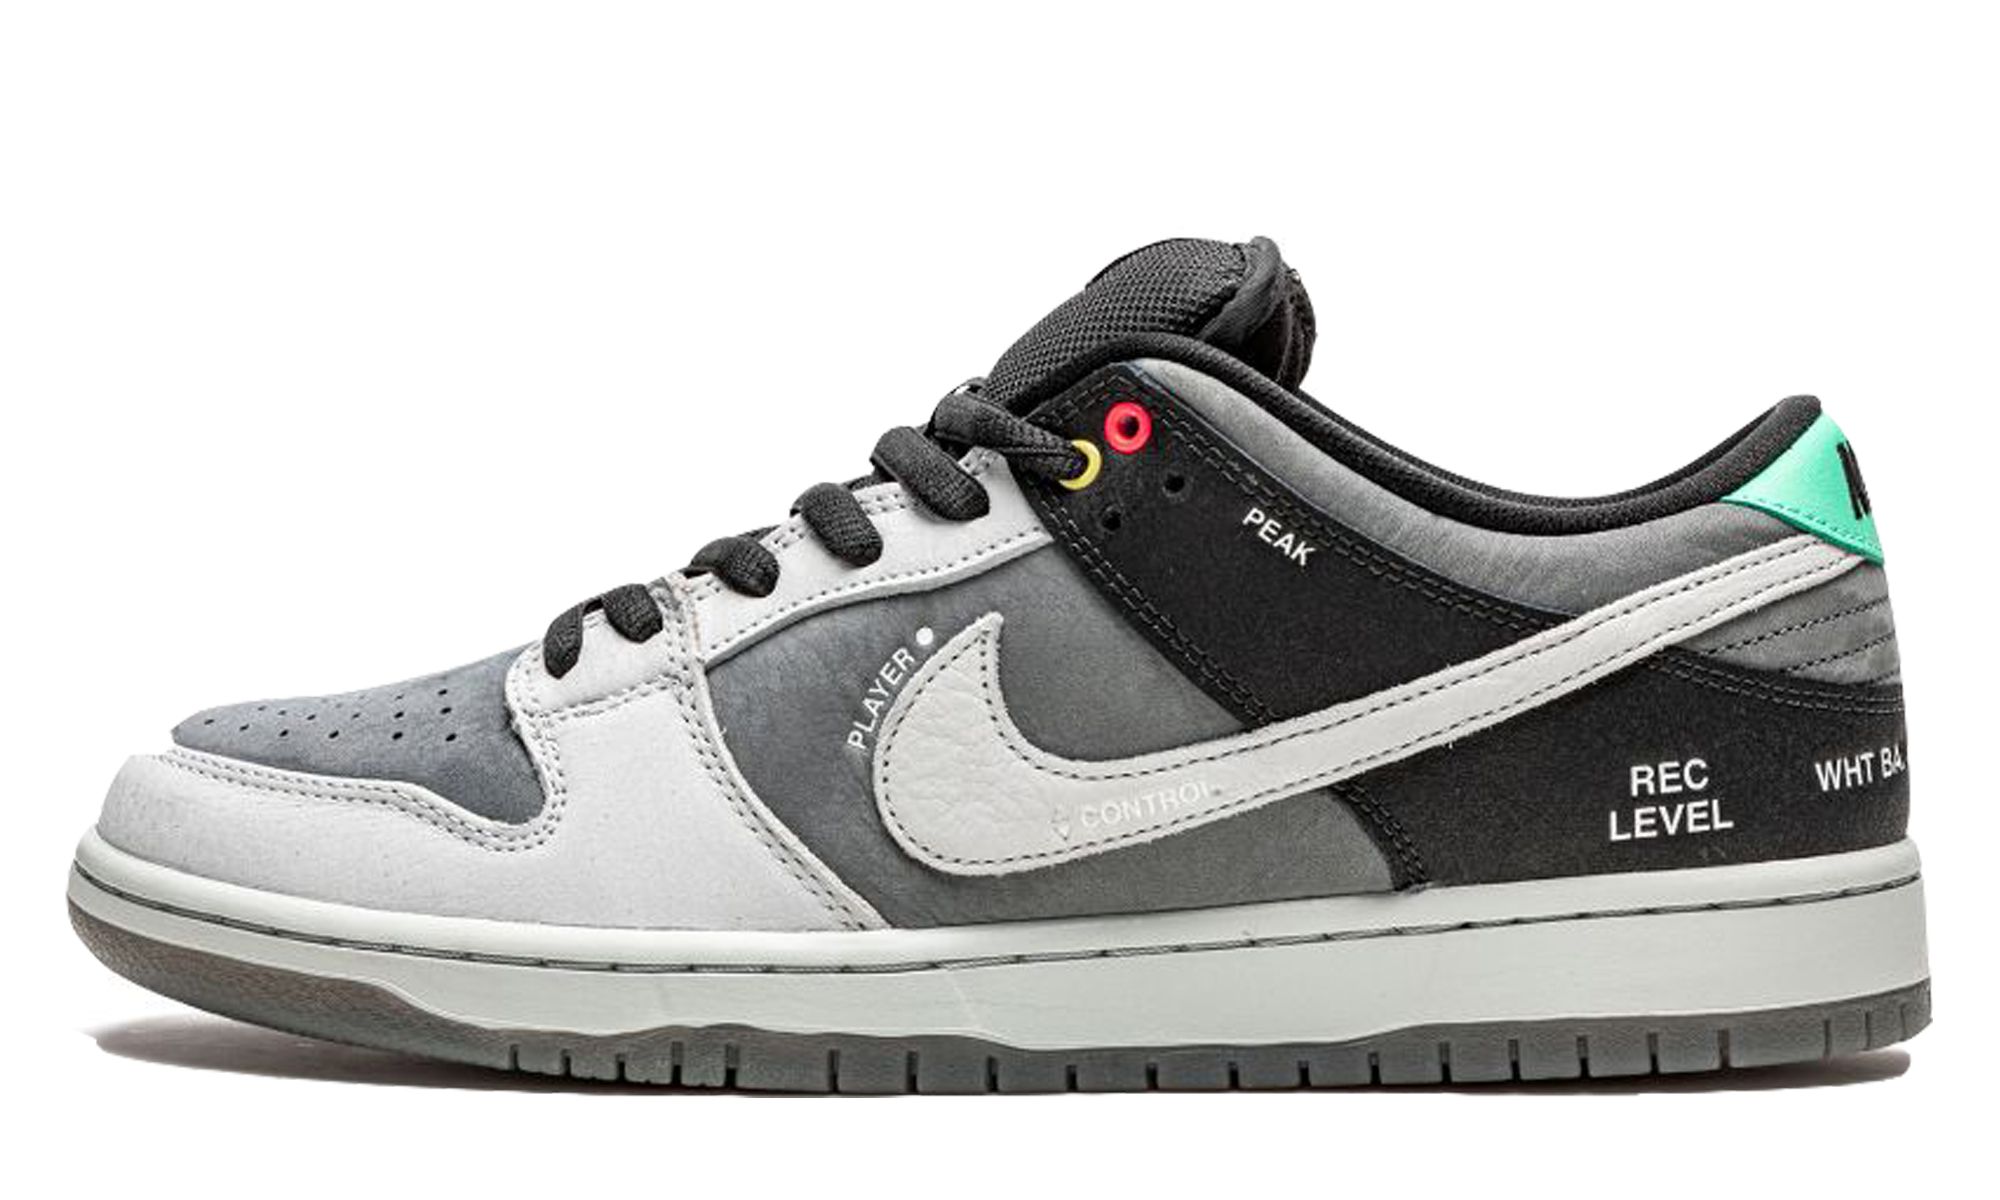 Nike SB Dunk Low "VX1000 Camcorder" - The Hype Store - Sneakers & Streetwear